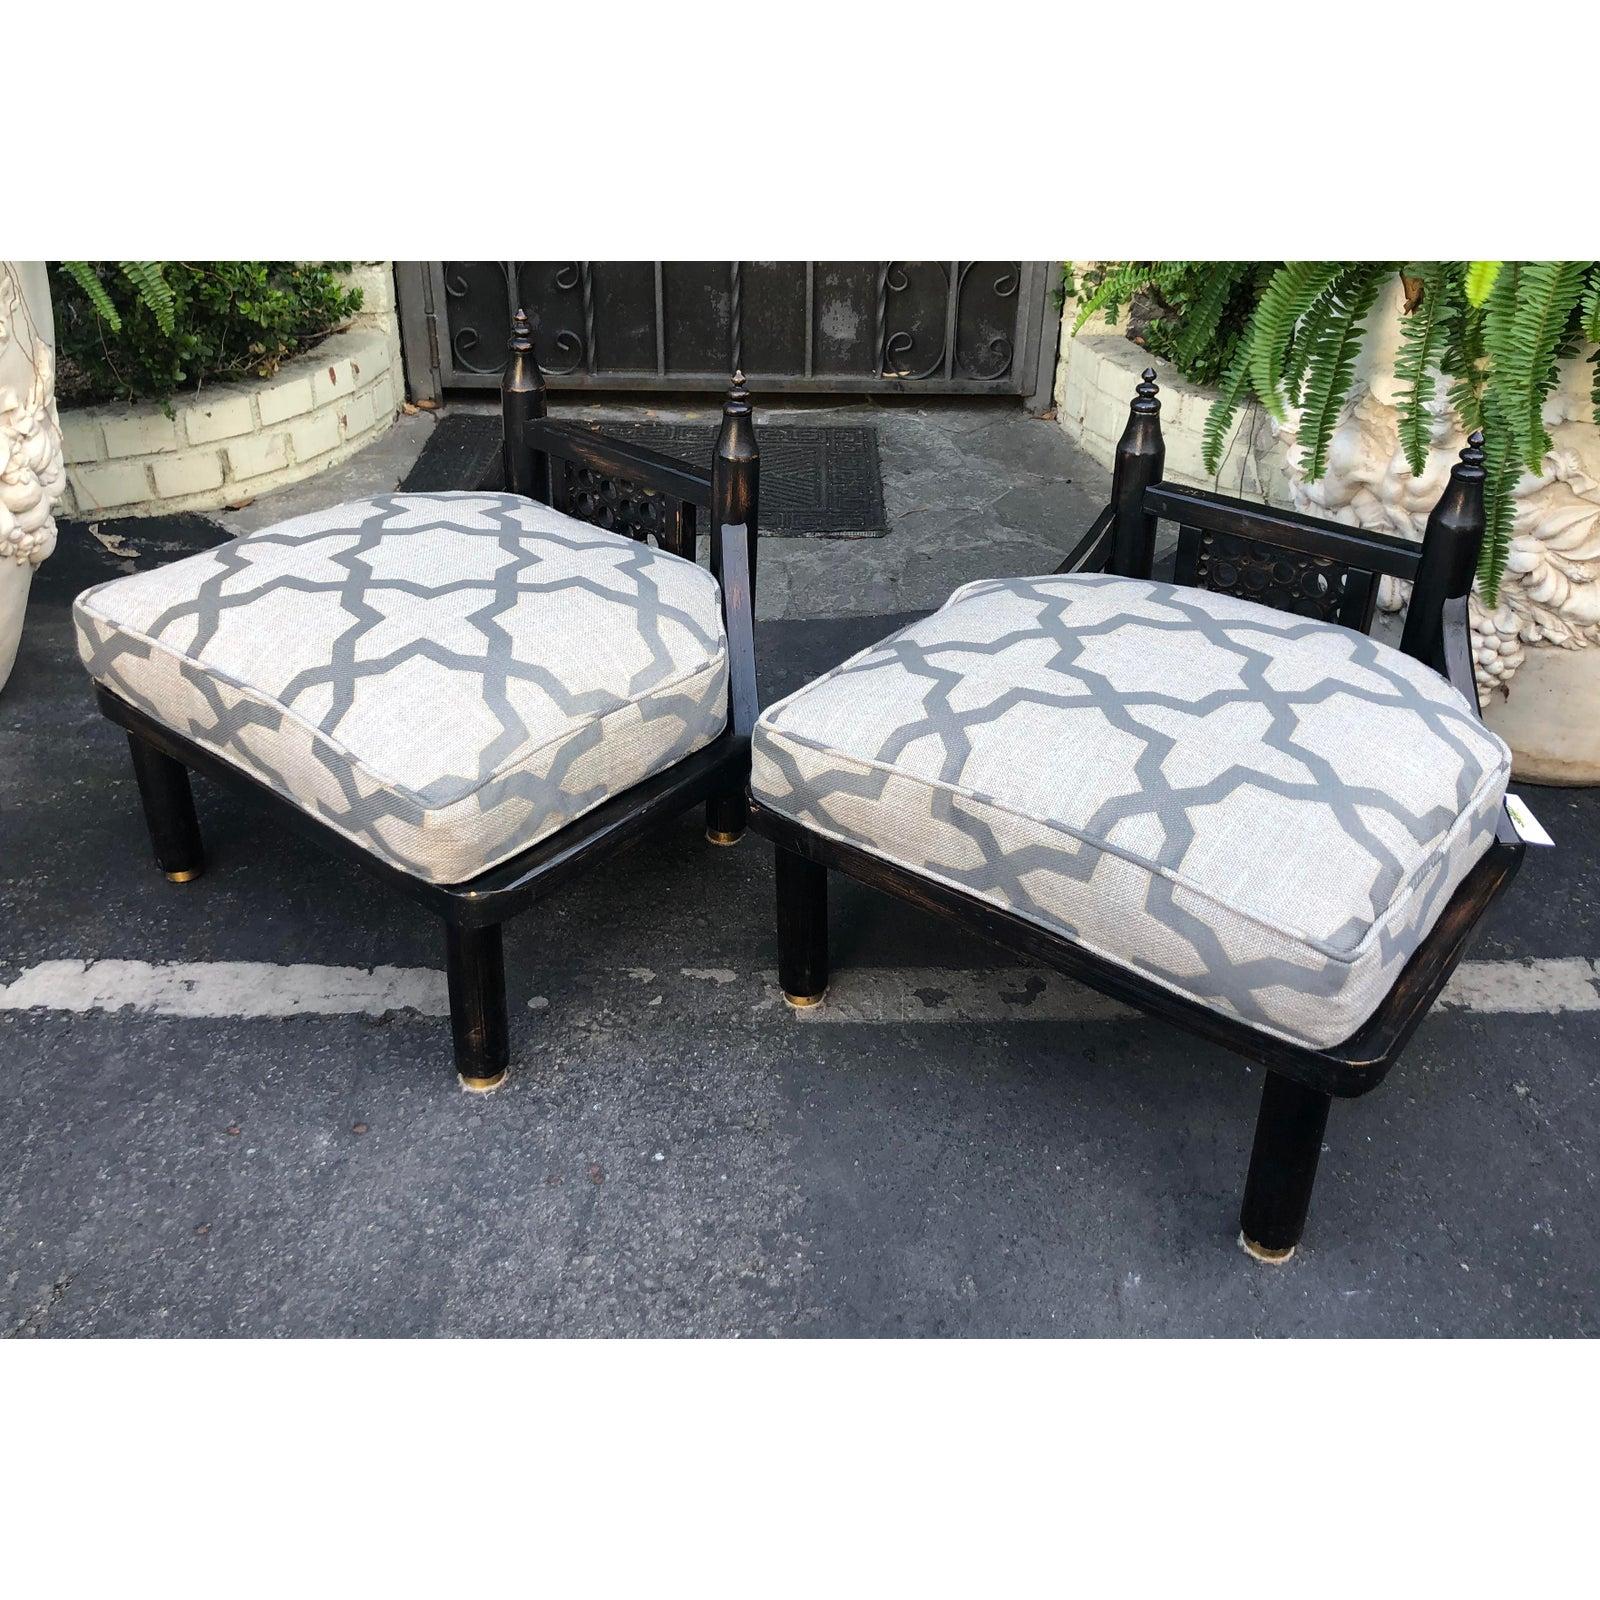 Unusual Vintage Ritts Co. Mid-Century Modern black chinoiserie low chairs.